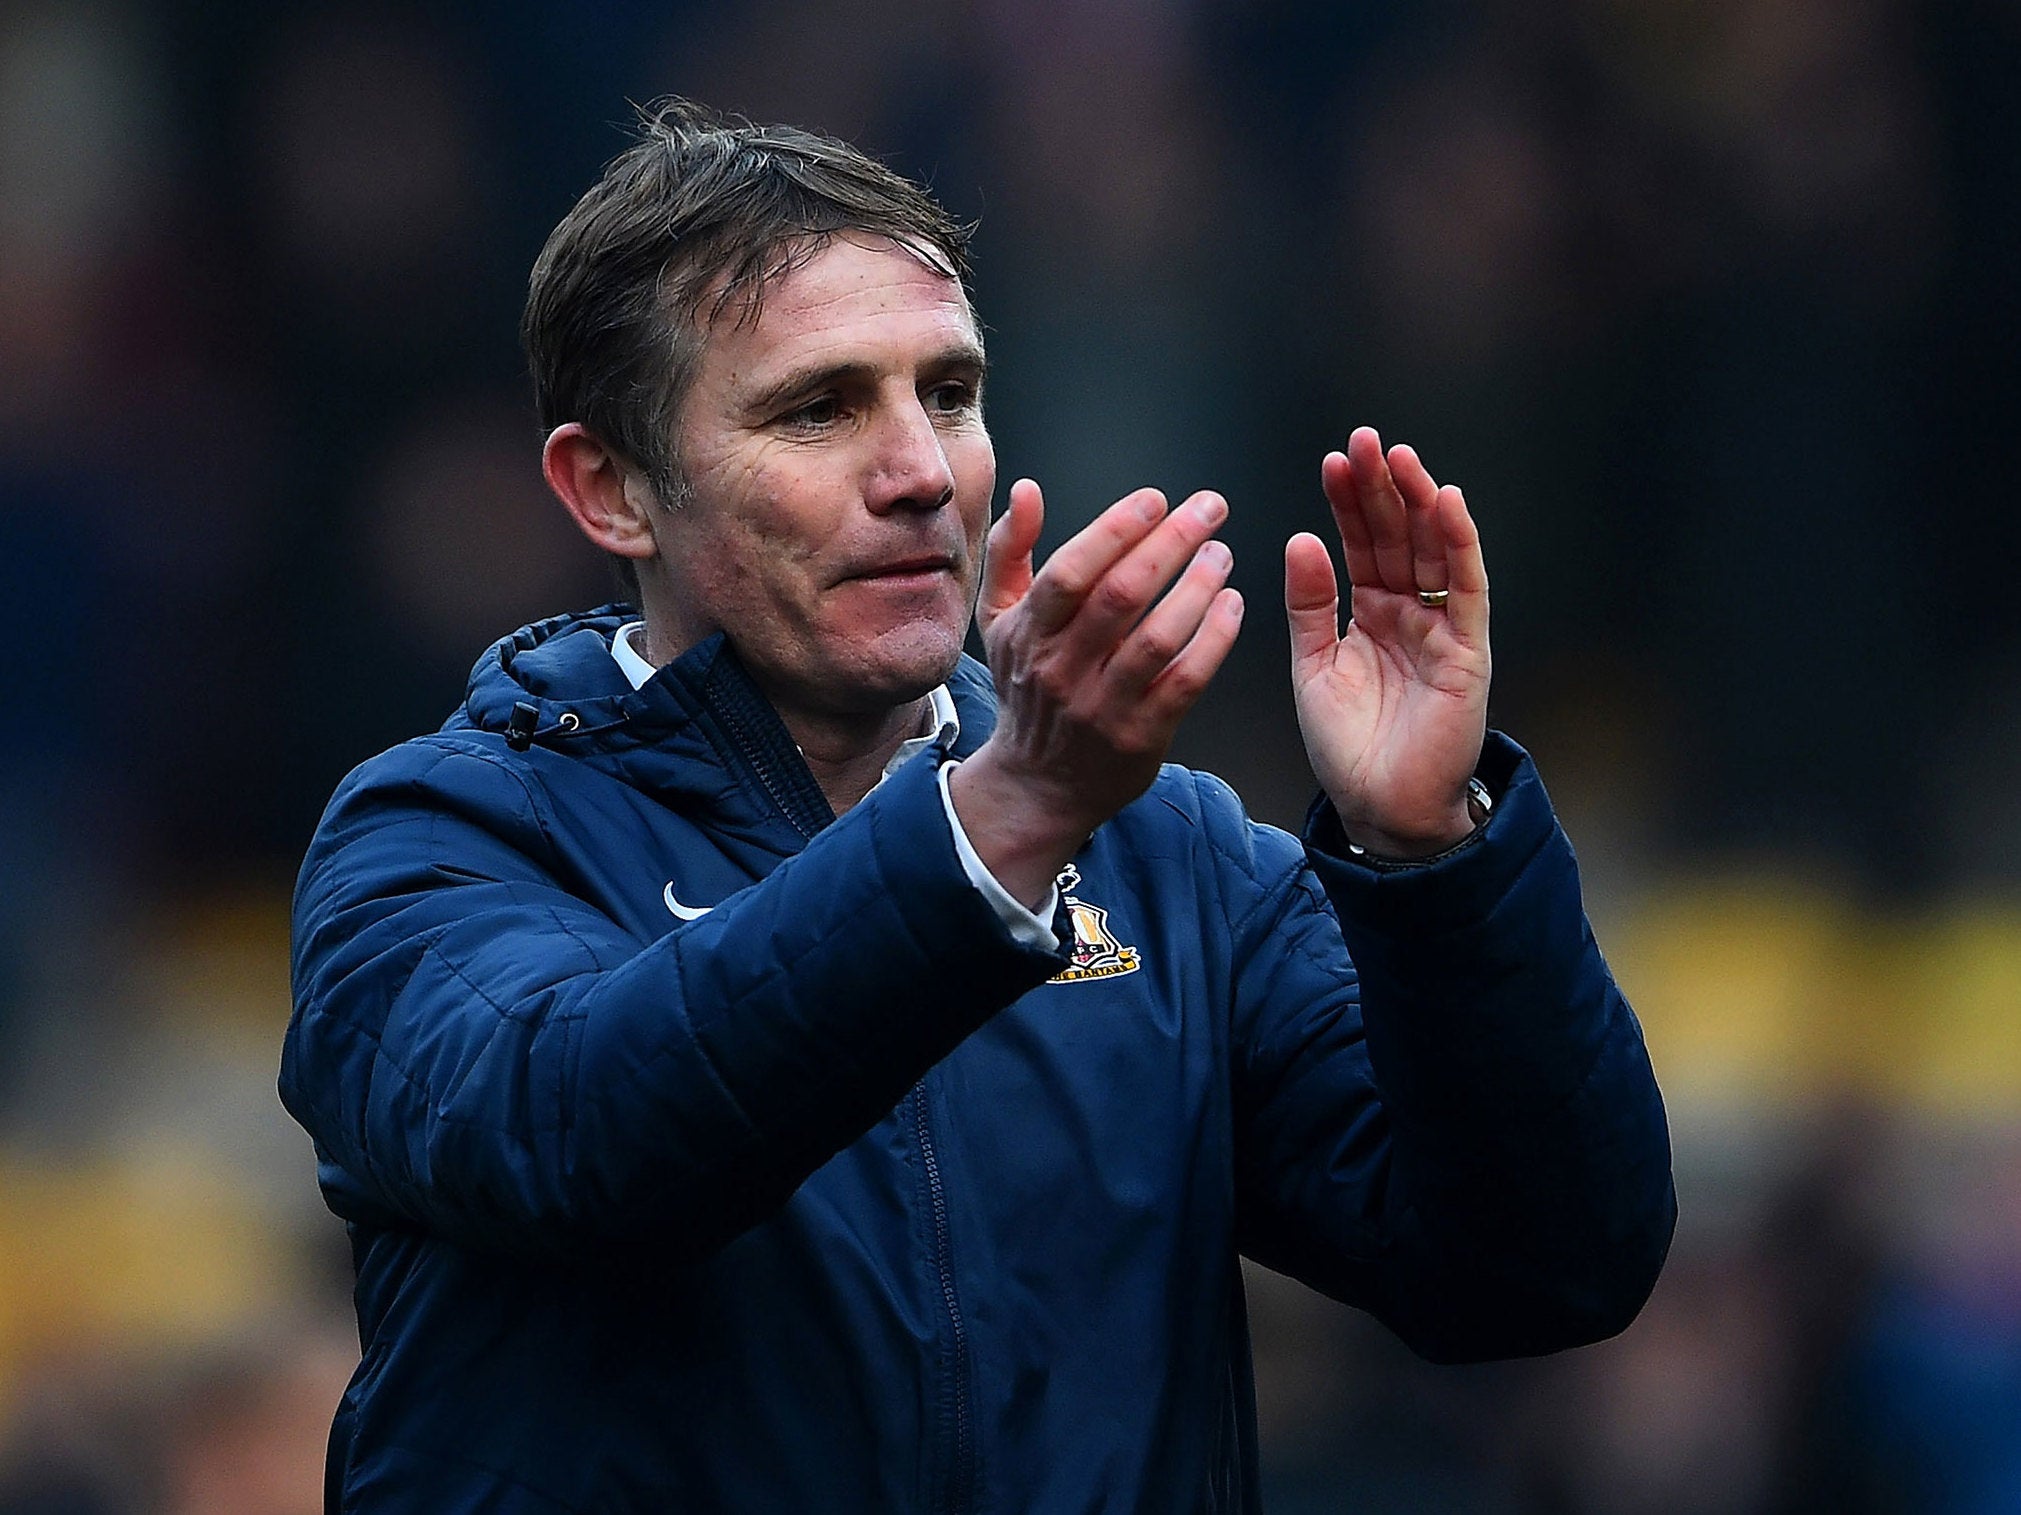 Phil Parkinson took over at Bolton Wanderers in 2016